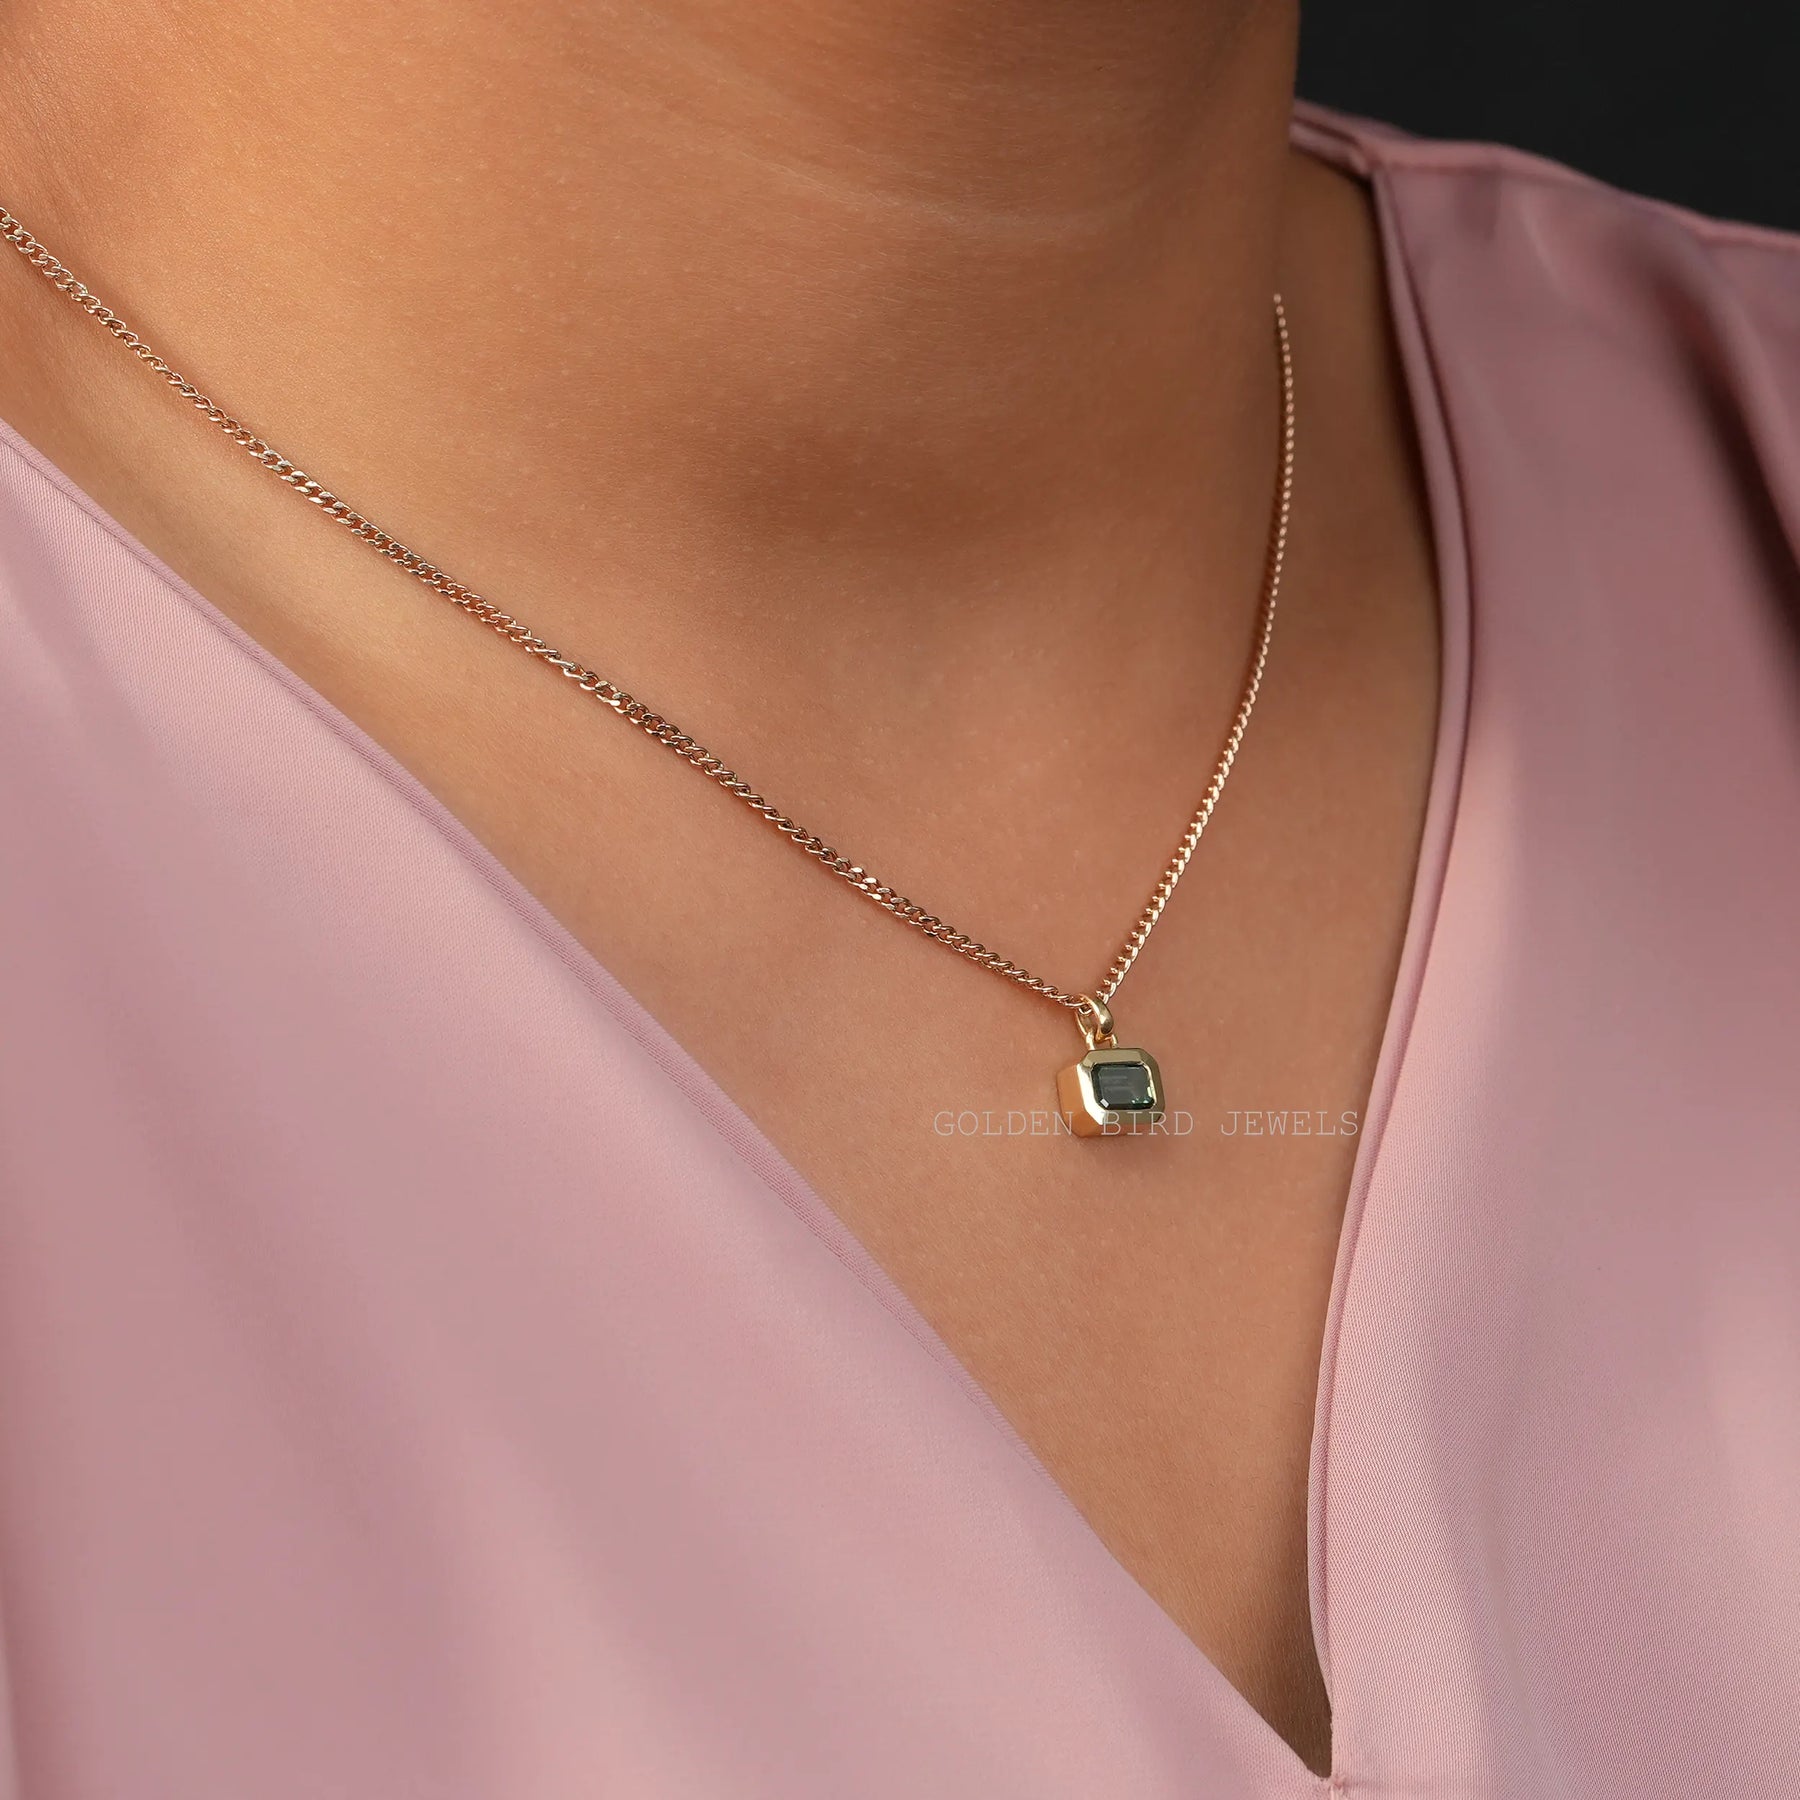 [This pendant crafted with green emerald moissanite]-[Golden Bird Jewels]